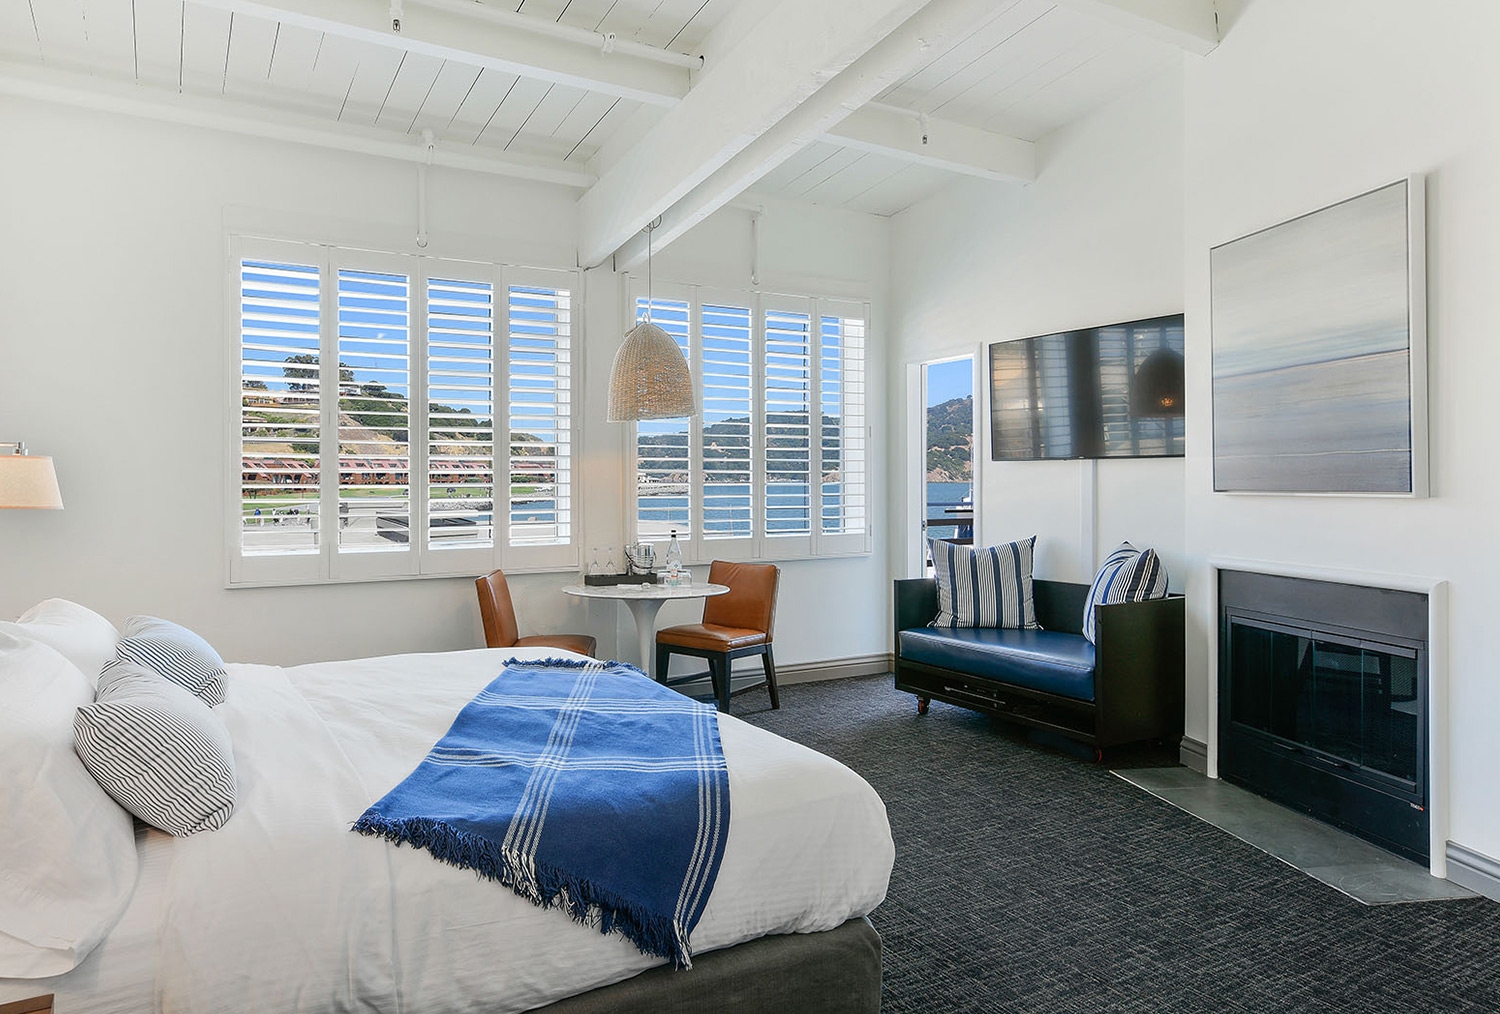 Our View King guest rooms are contemorary and bright with views of the water and surrounding hills